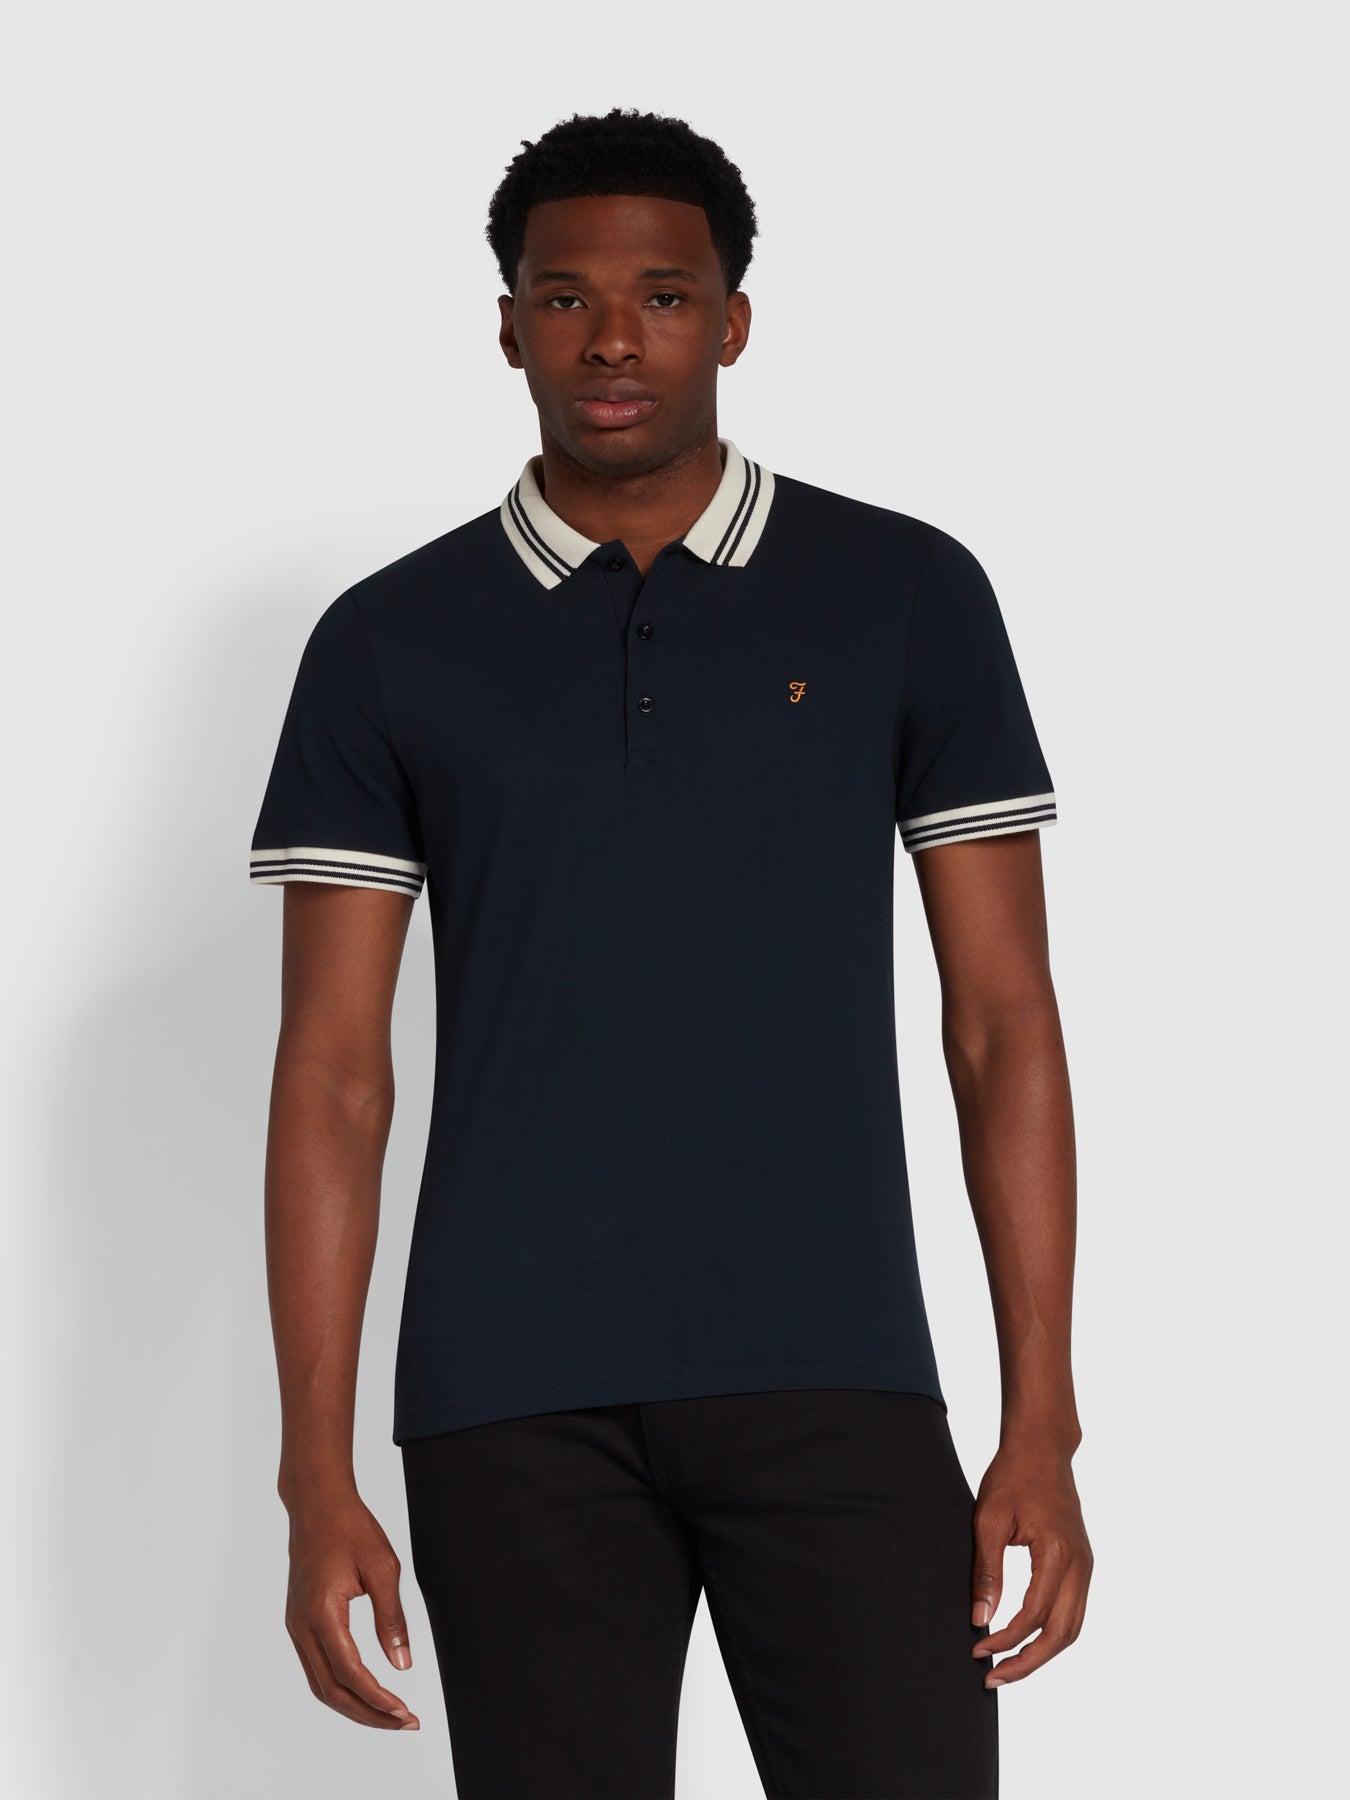 View Stanton Slim Fit Tipped Organic Cotton Polo Shirt In True Navy information